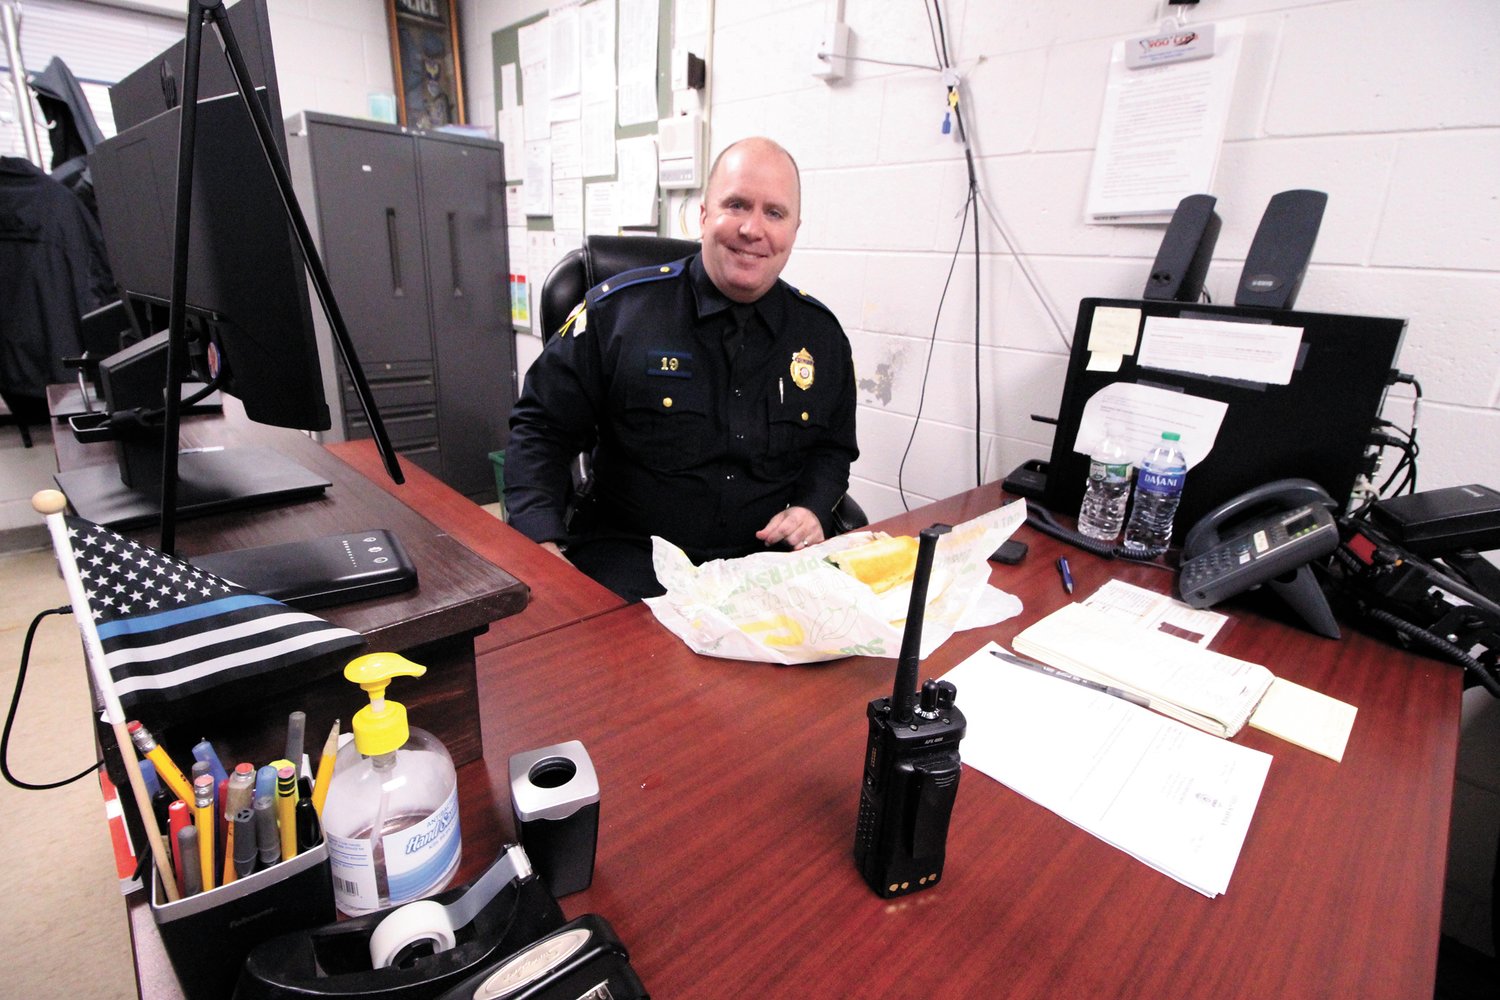 TIME FOR LUNCH:  Lt. McGee finds a place for a sandwich between his paperwork.